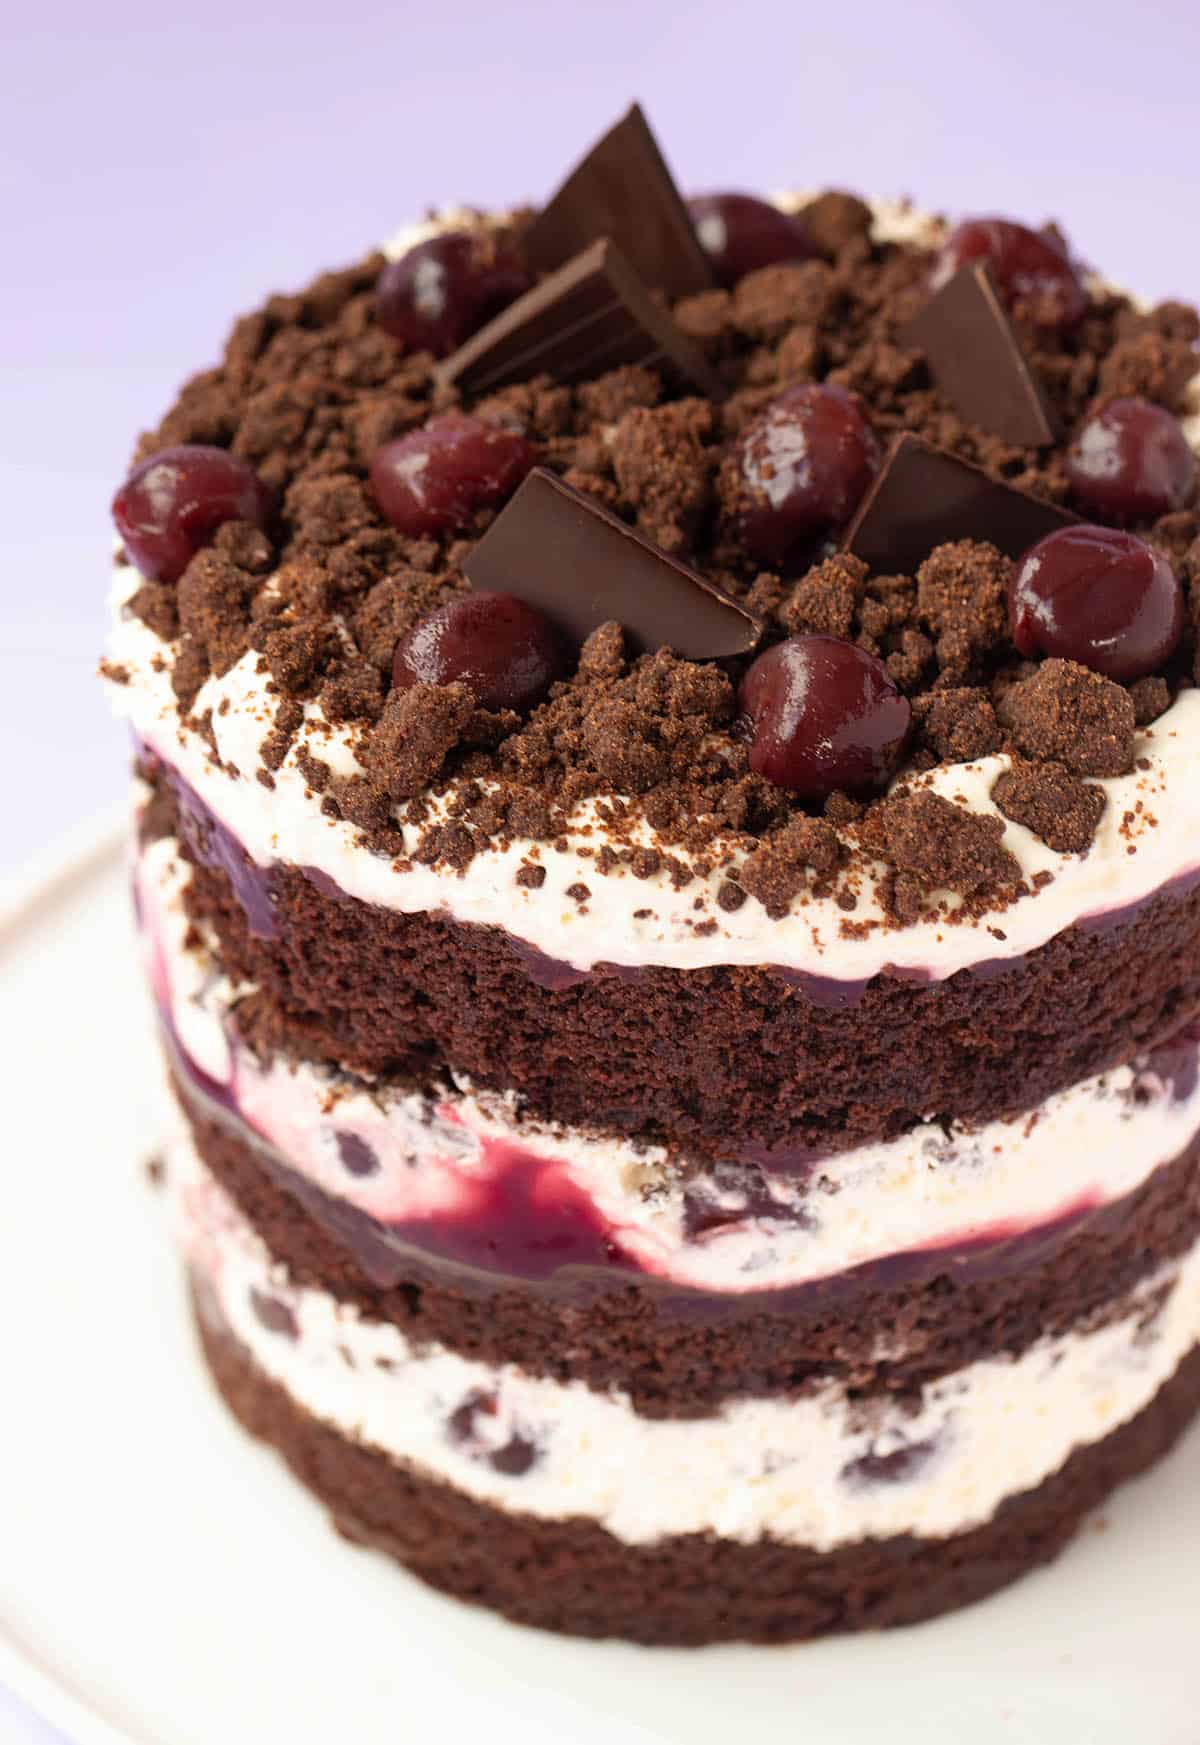 Top view of a beautiful Chocolate Cherry Cake.